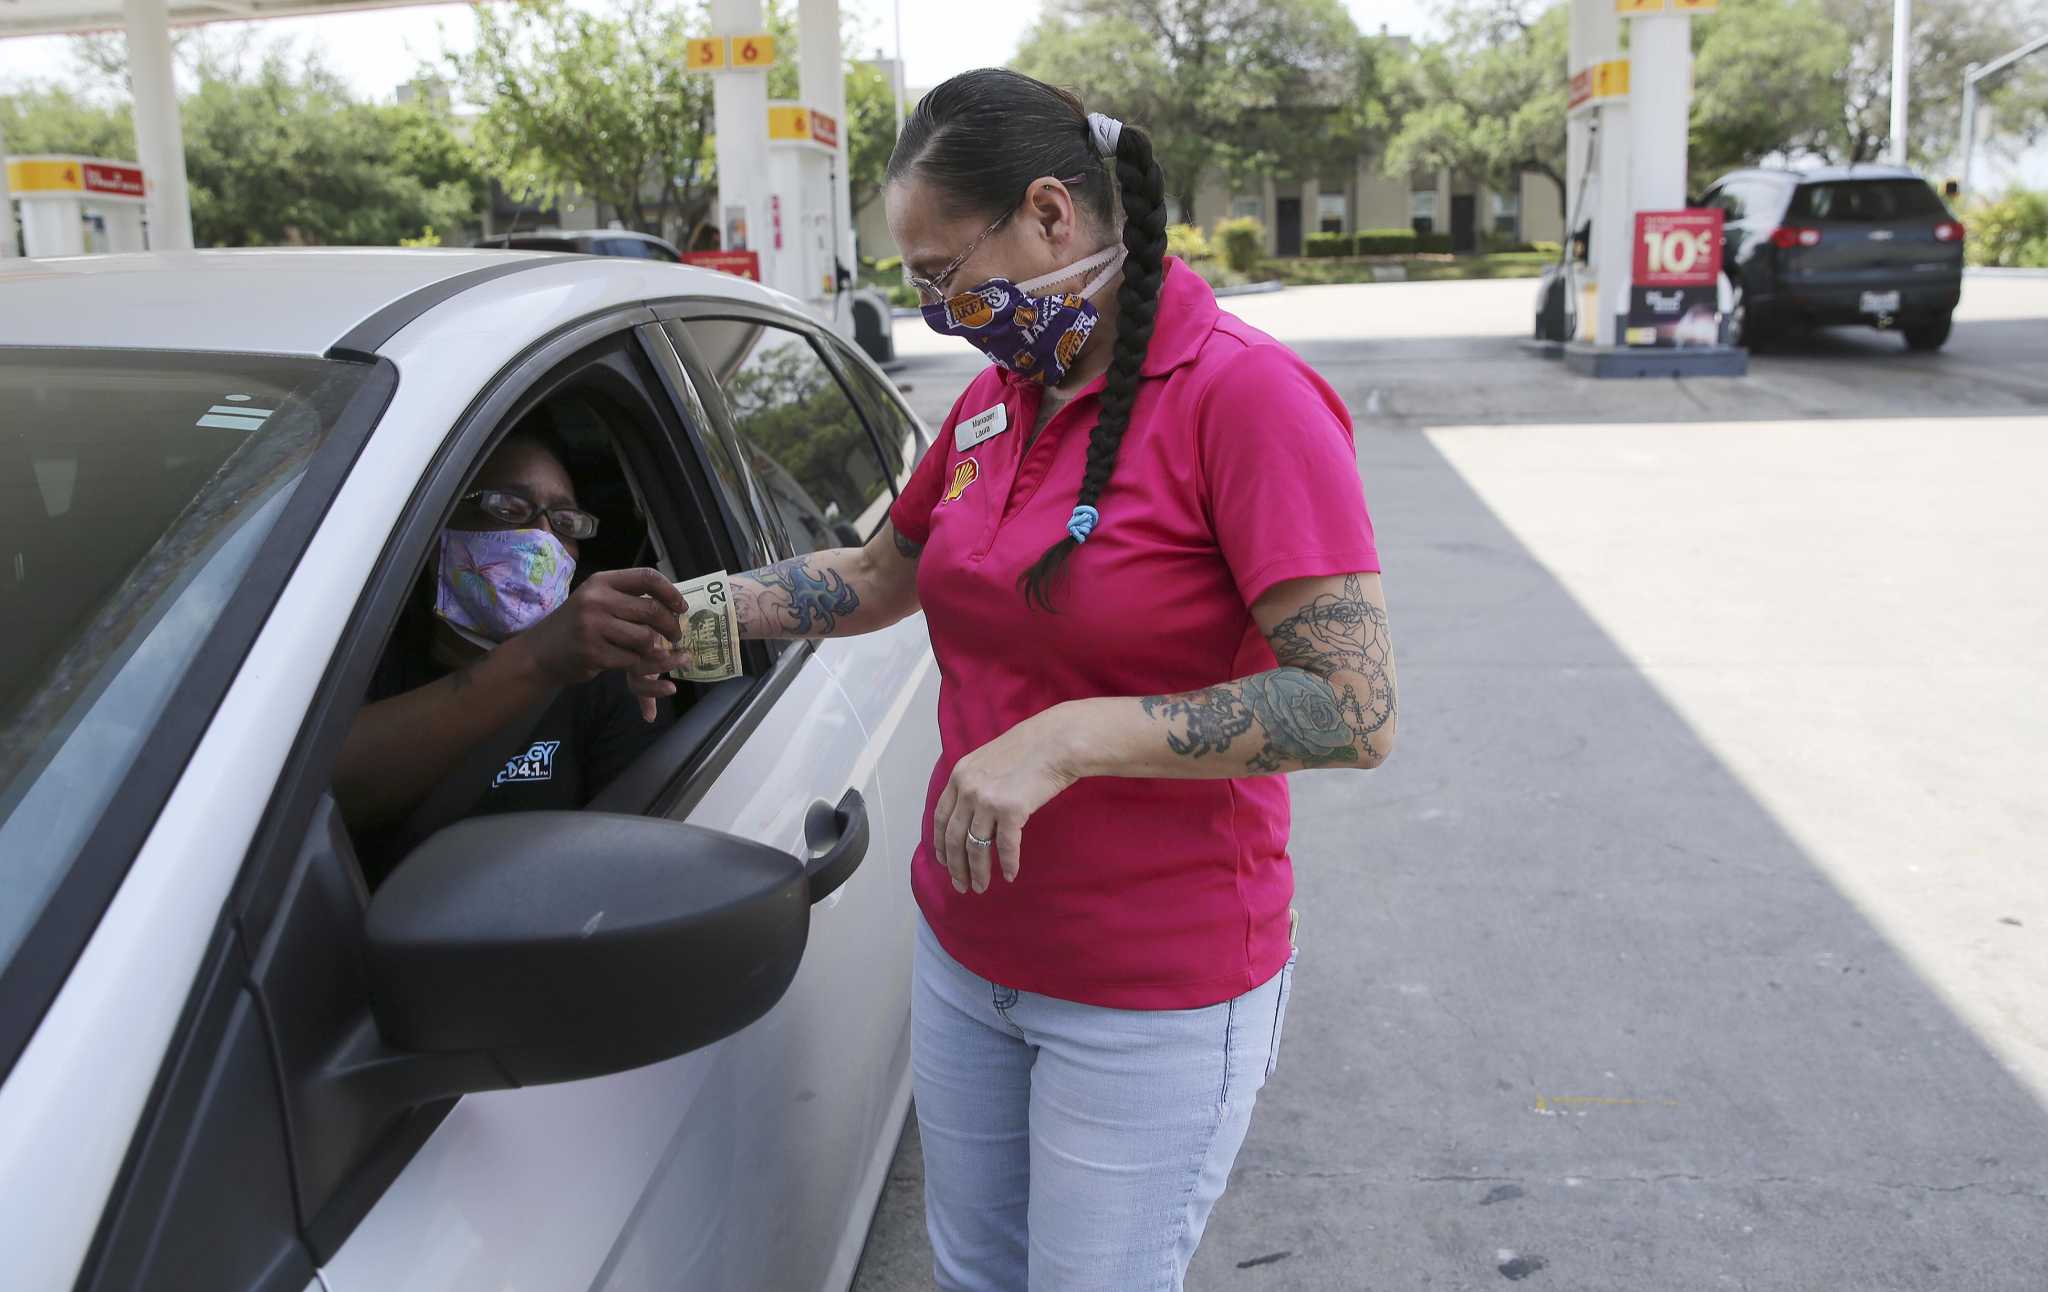 san antonio drivers pay some of the cheapest gas prices in the u s expressnews com https www expressnews com business article san antonio drivers pay some of the cheapest gas 15476592 php